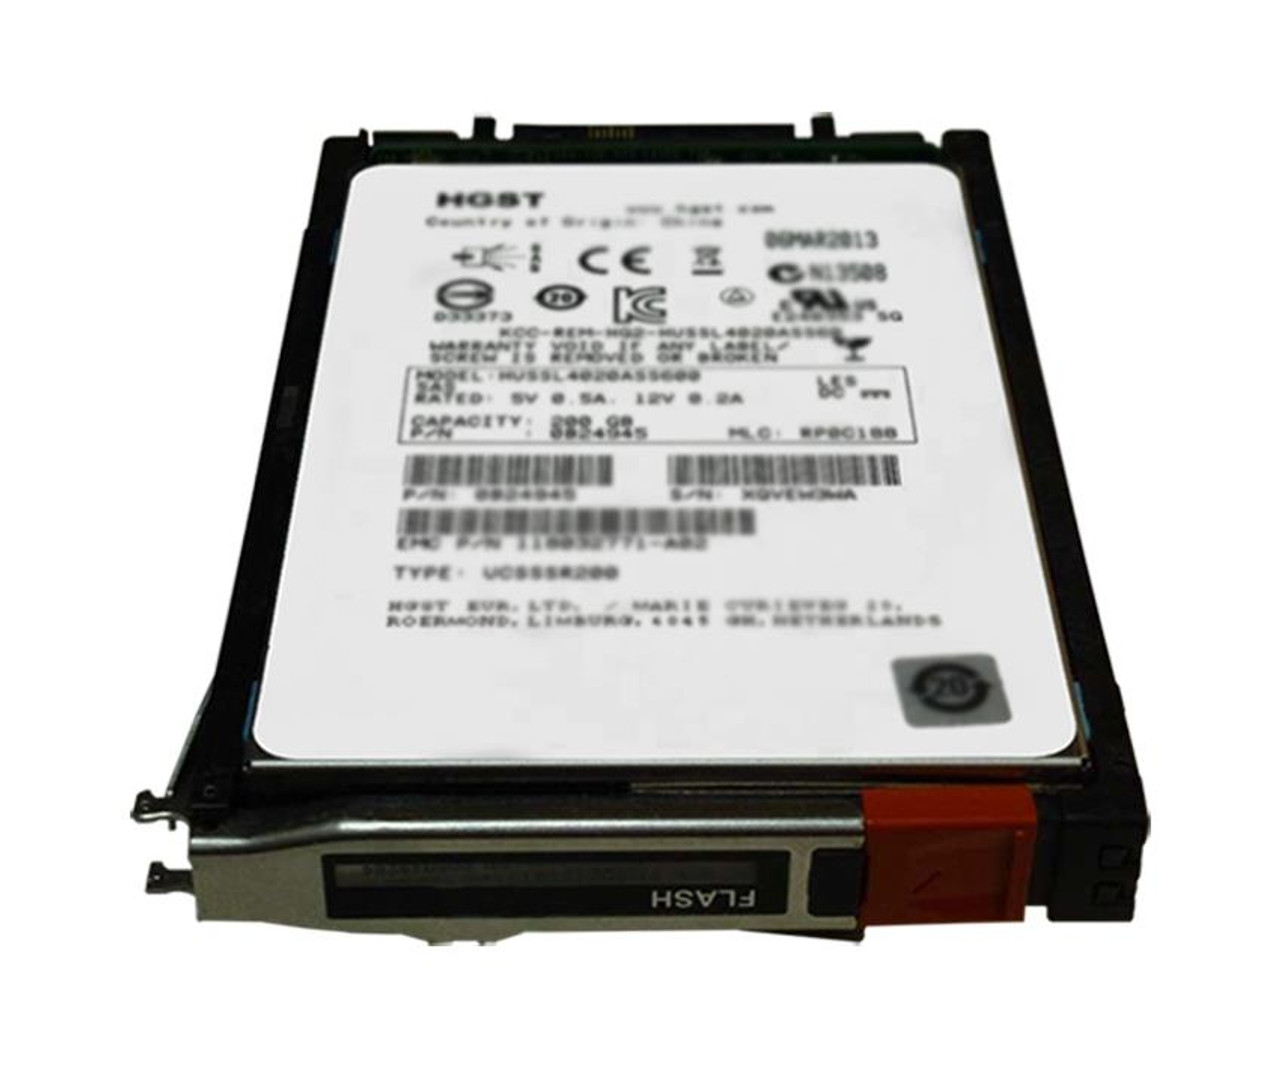 N5-2S6FX-800U EMC 800GB SAS 6Gbps 2.5-inch Internal Solid State Drive (SSD) Upgrade for VNXe1600 25 x 2.5 Enclosure